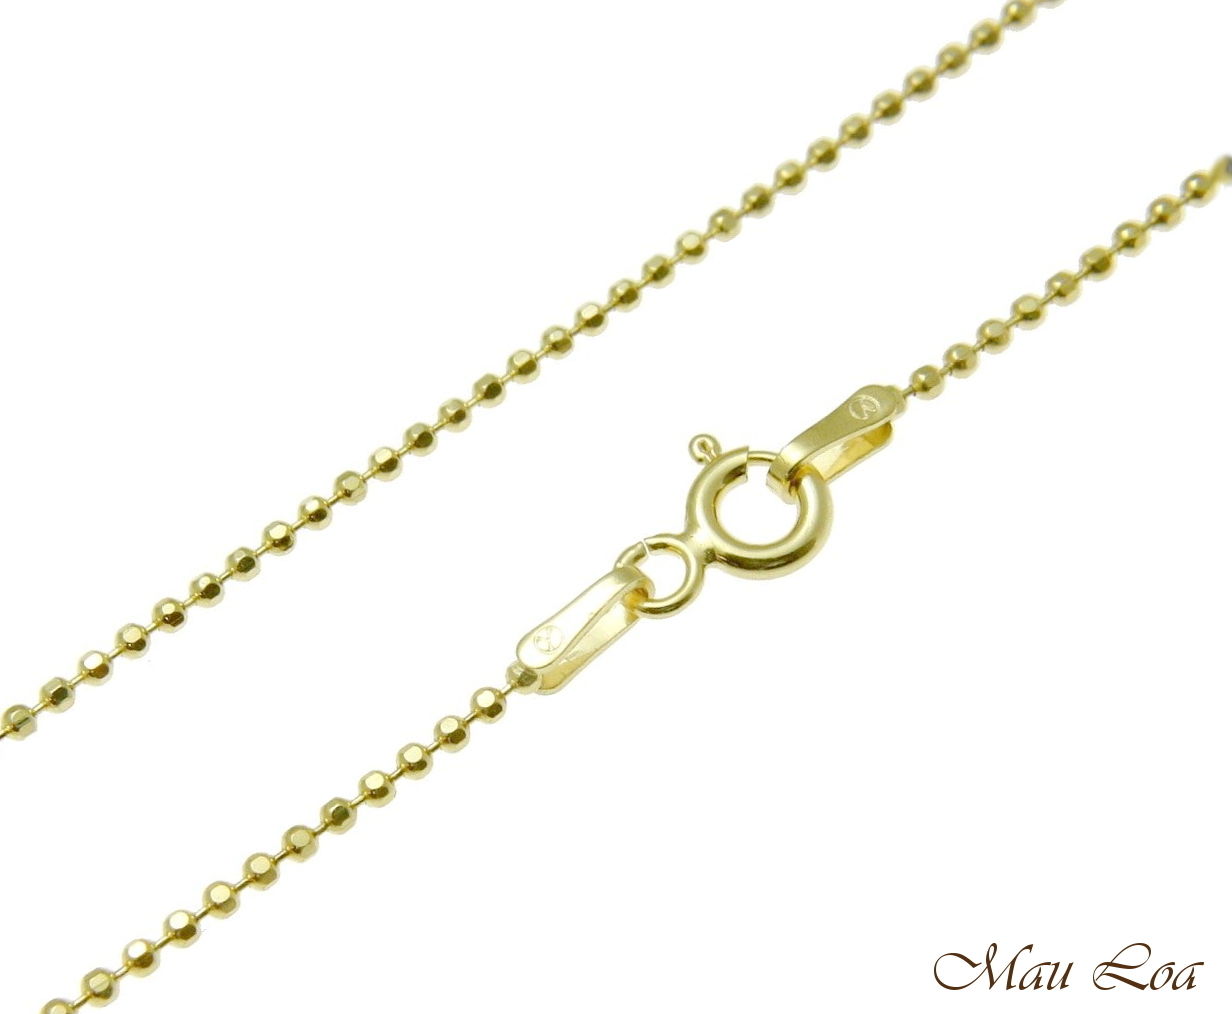 Sterling Silver 925 Yellow Gold Italian 1.2mm Ball Bead Chain Necklace 16 18 20"